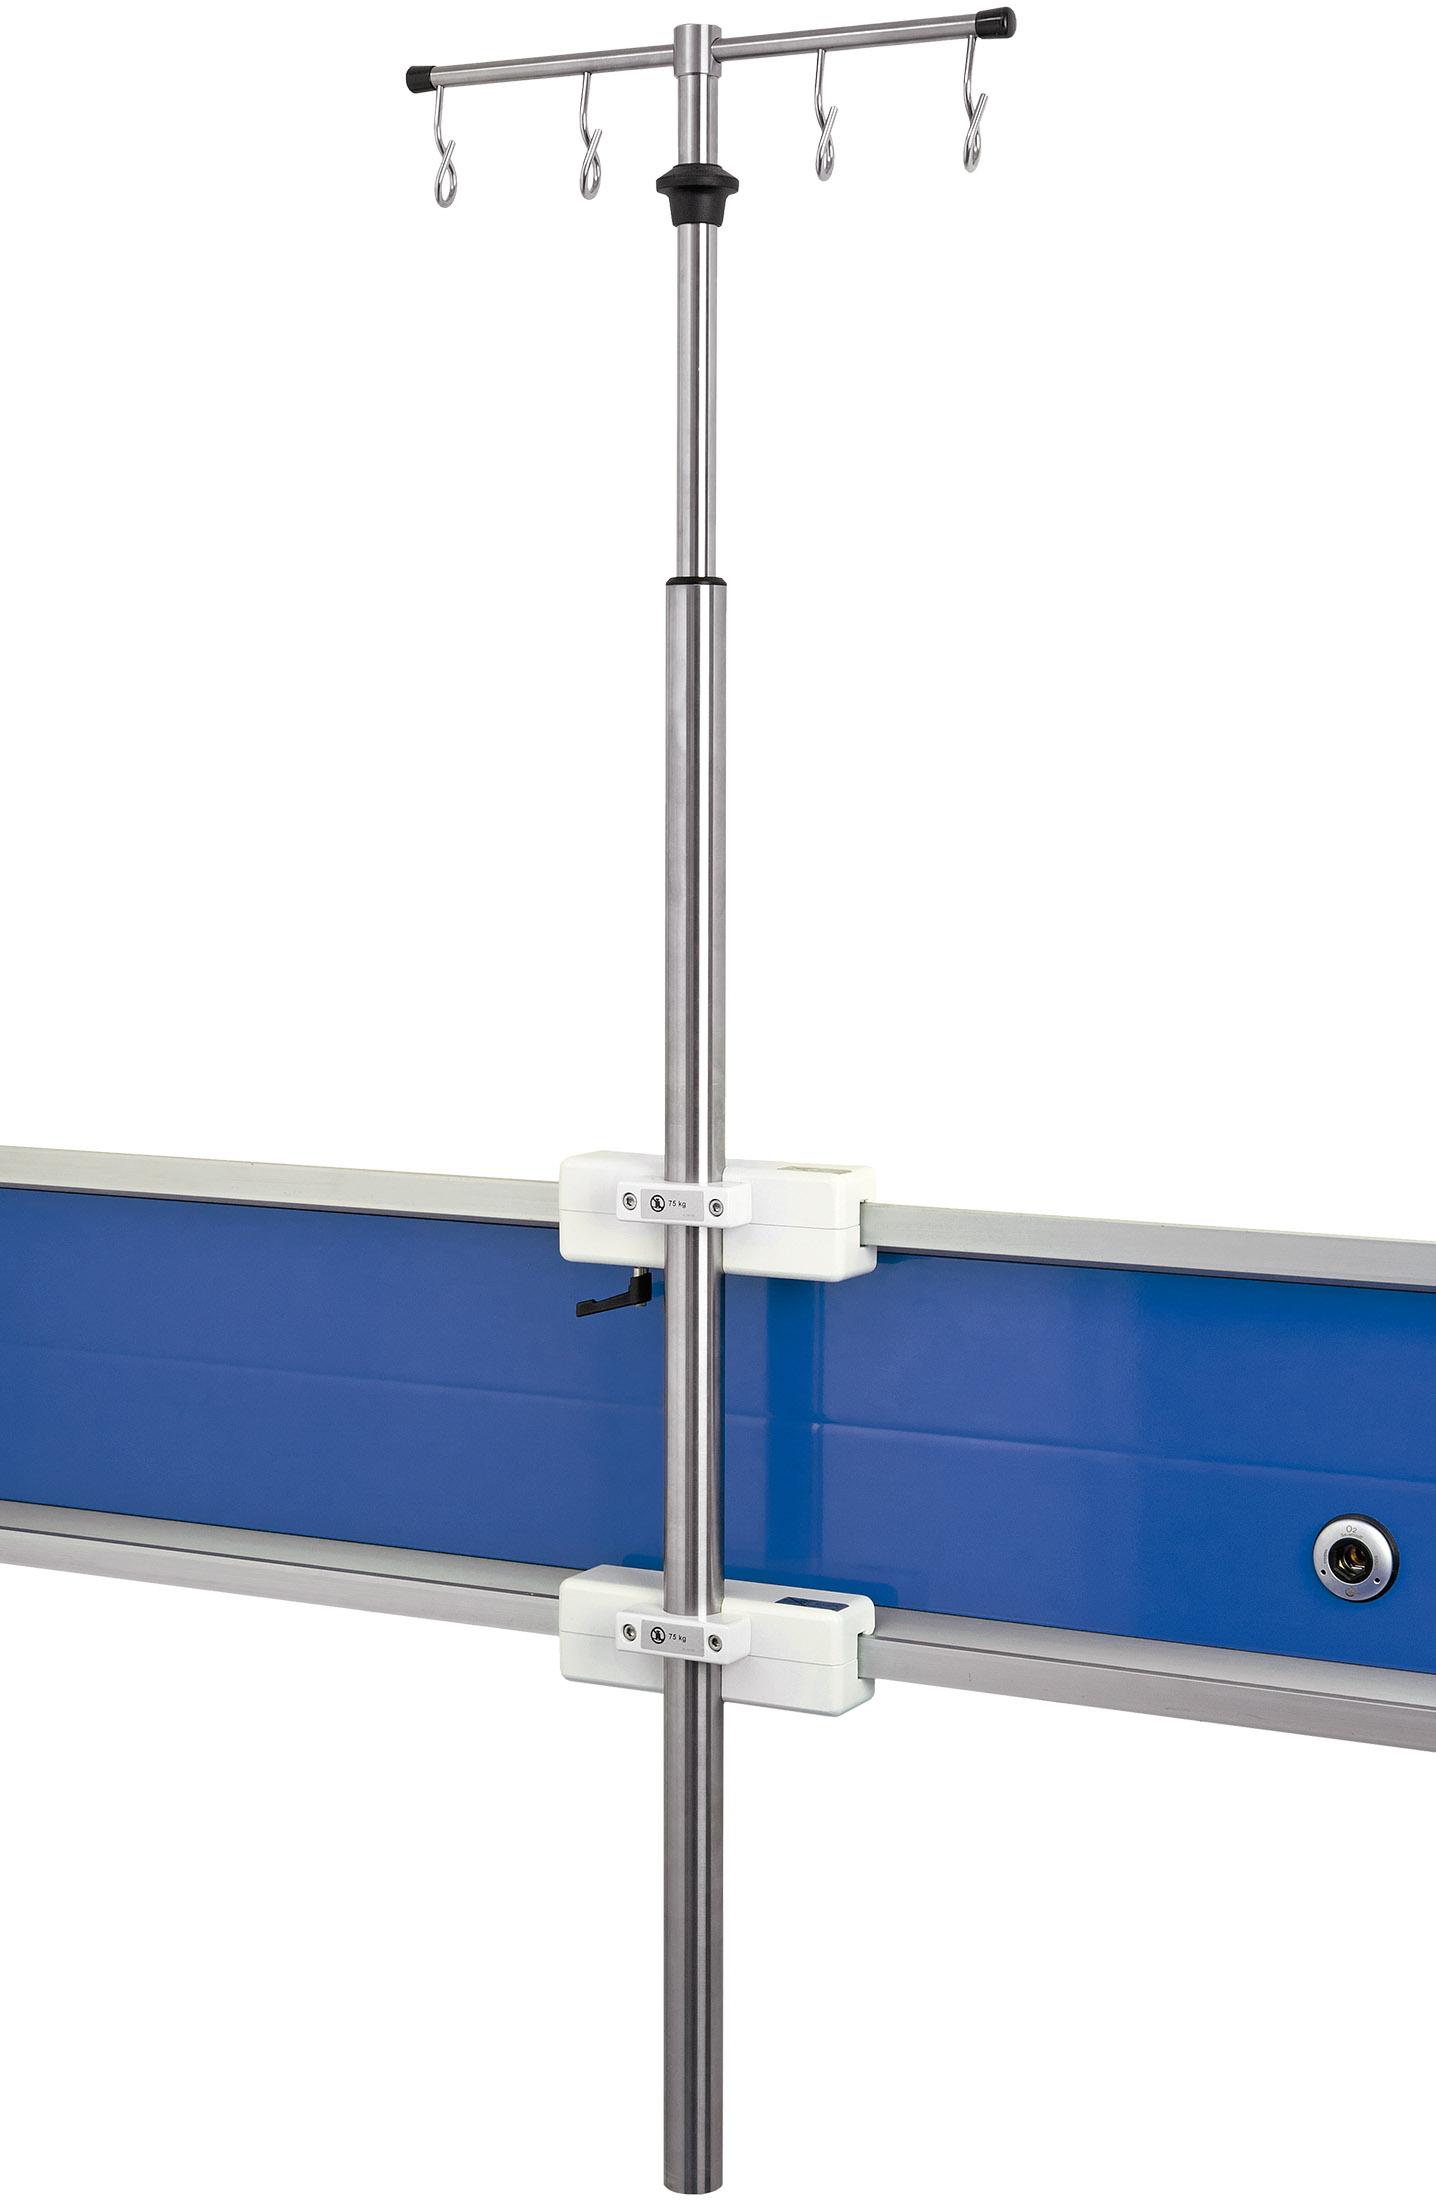 Main photo of the product with name, Moveable wall rail carrier